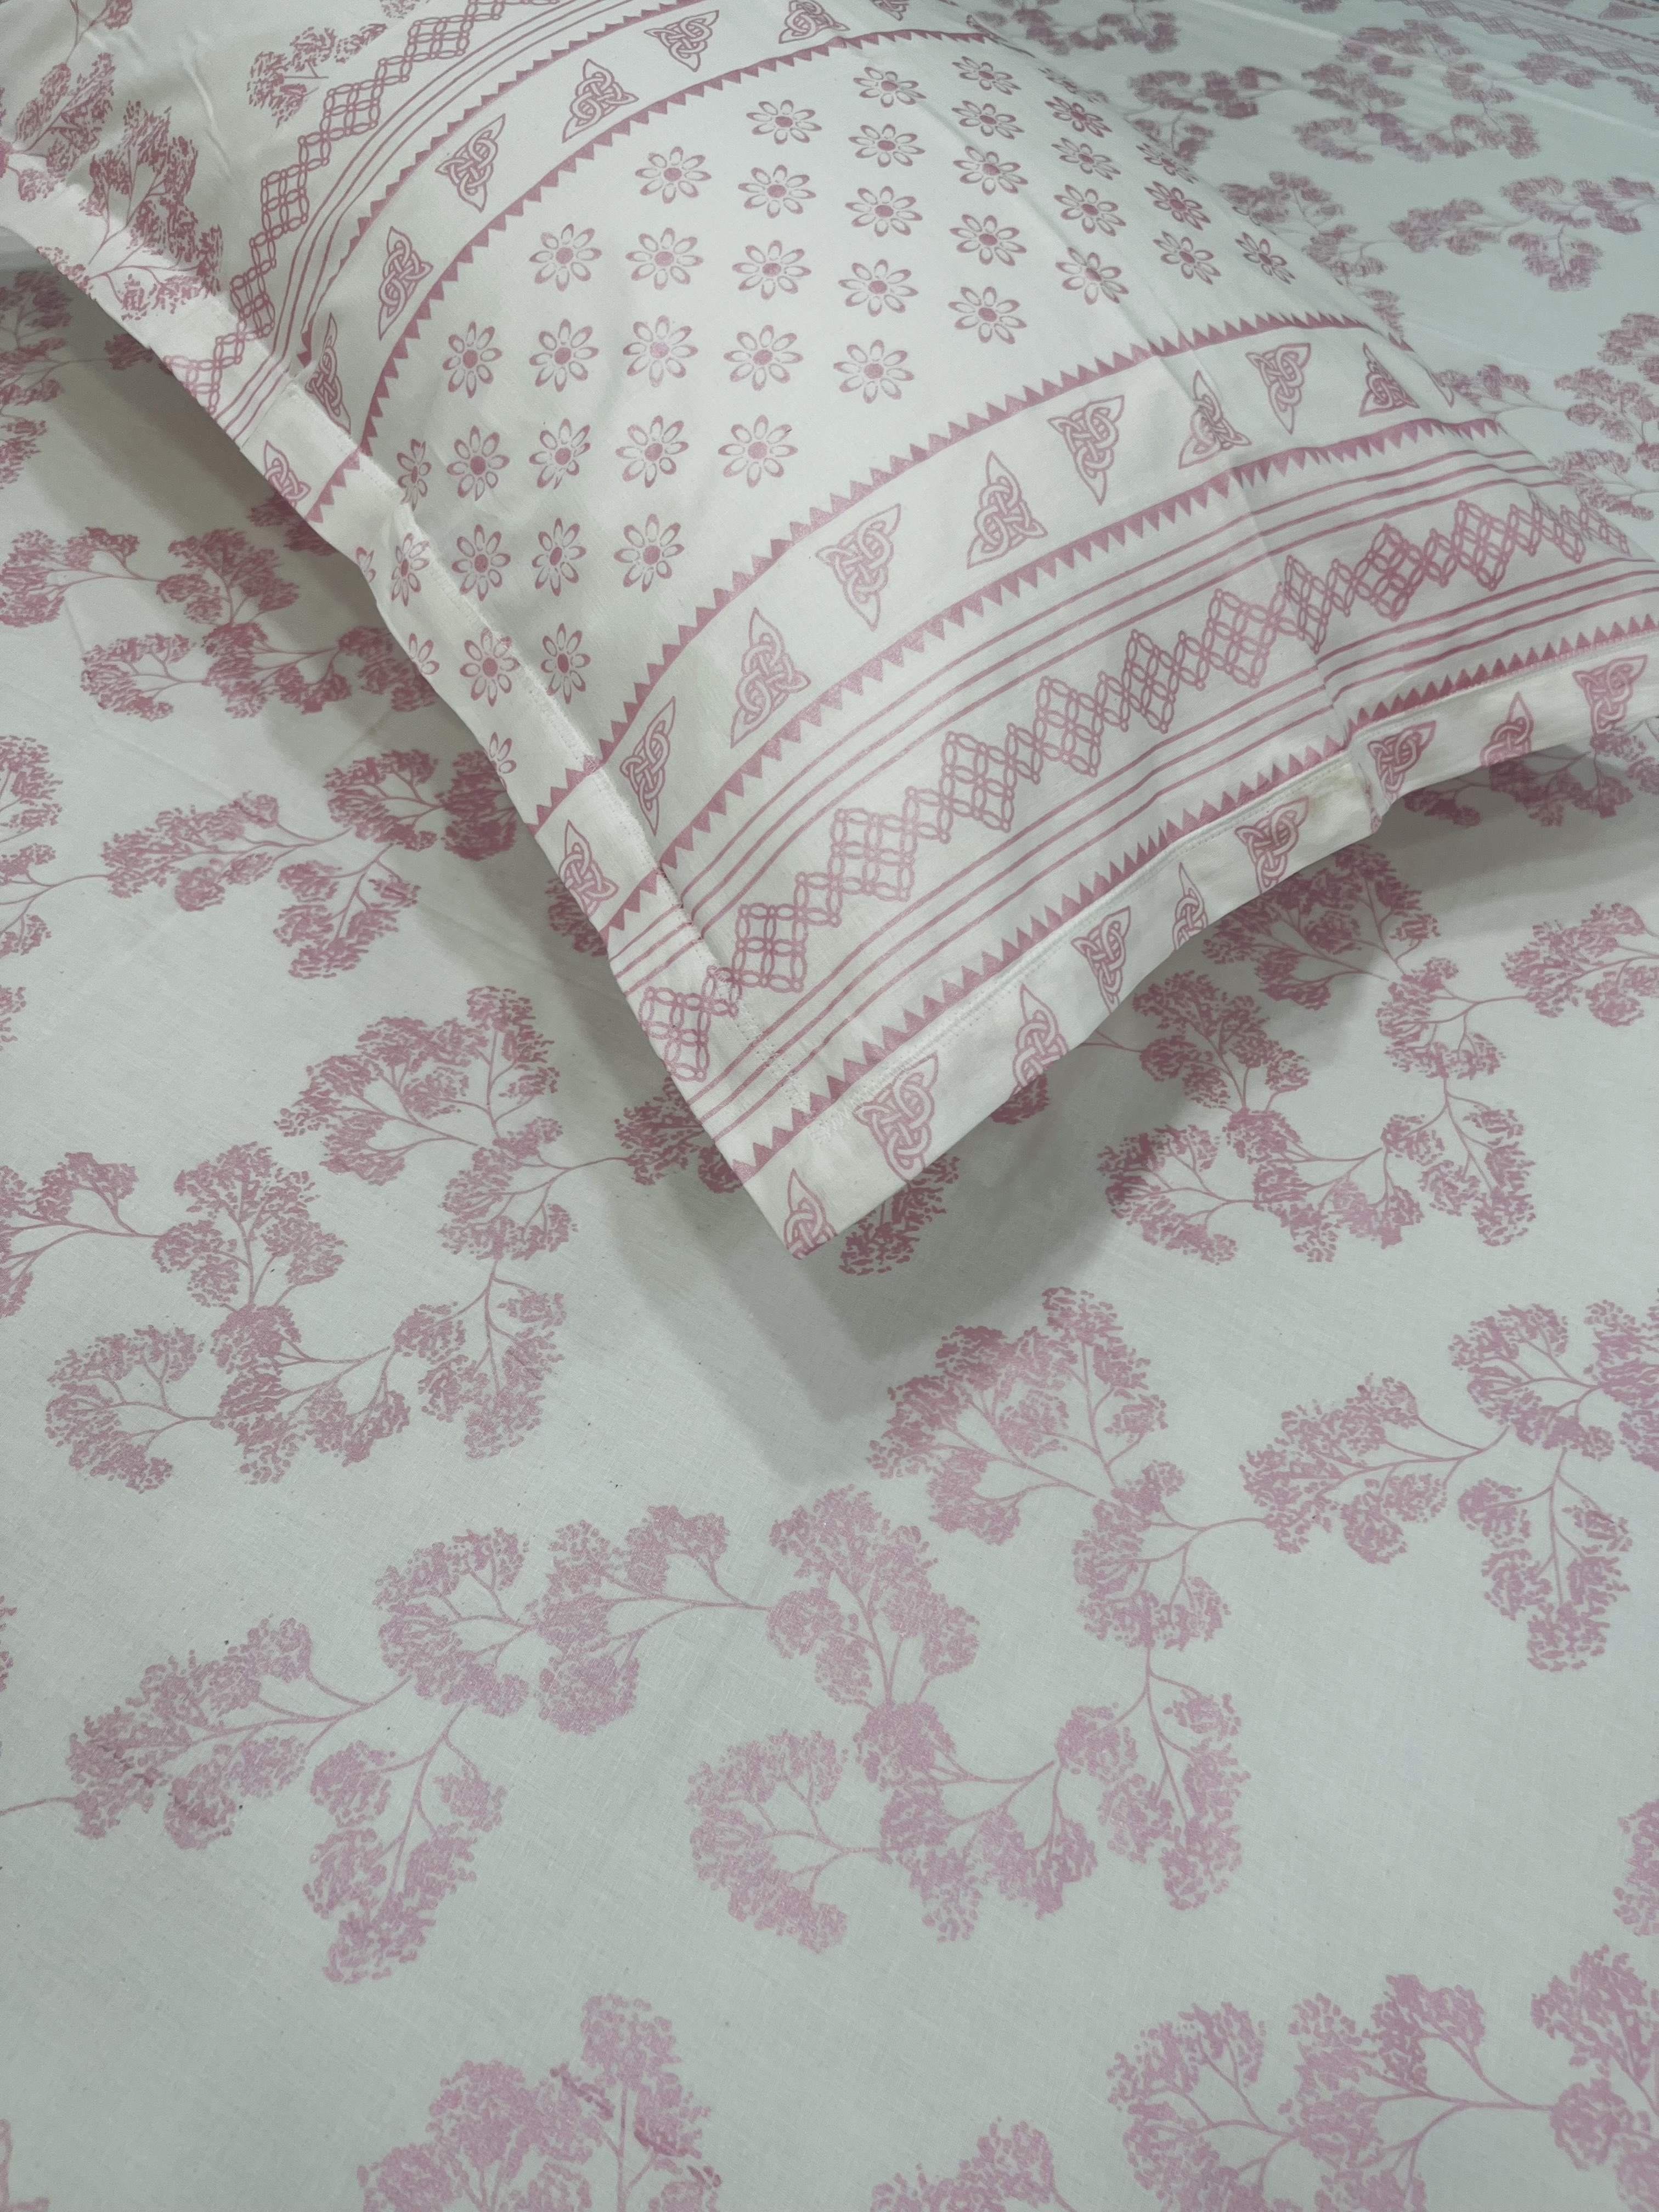 Boria Bistar | Boria Bistar 100% Cotton Twill Satin Pearl Printed Double Bedsheet with 2 Pillowcovers|3